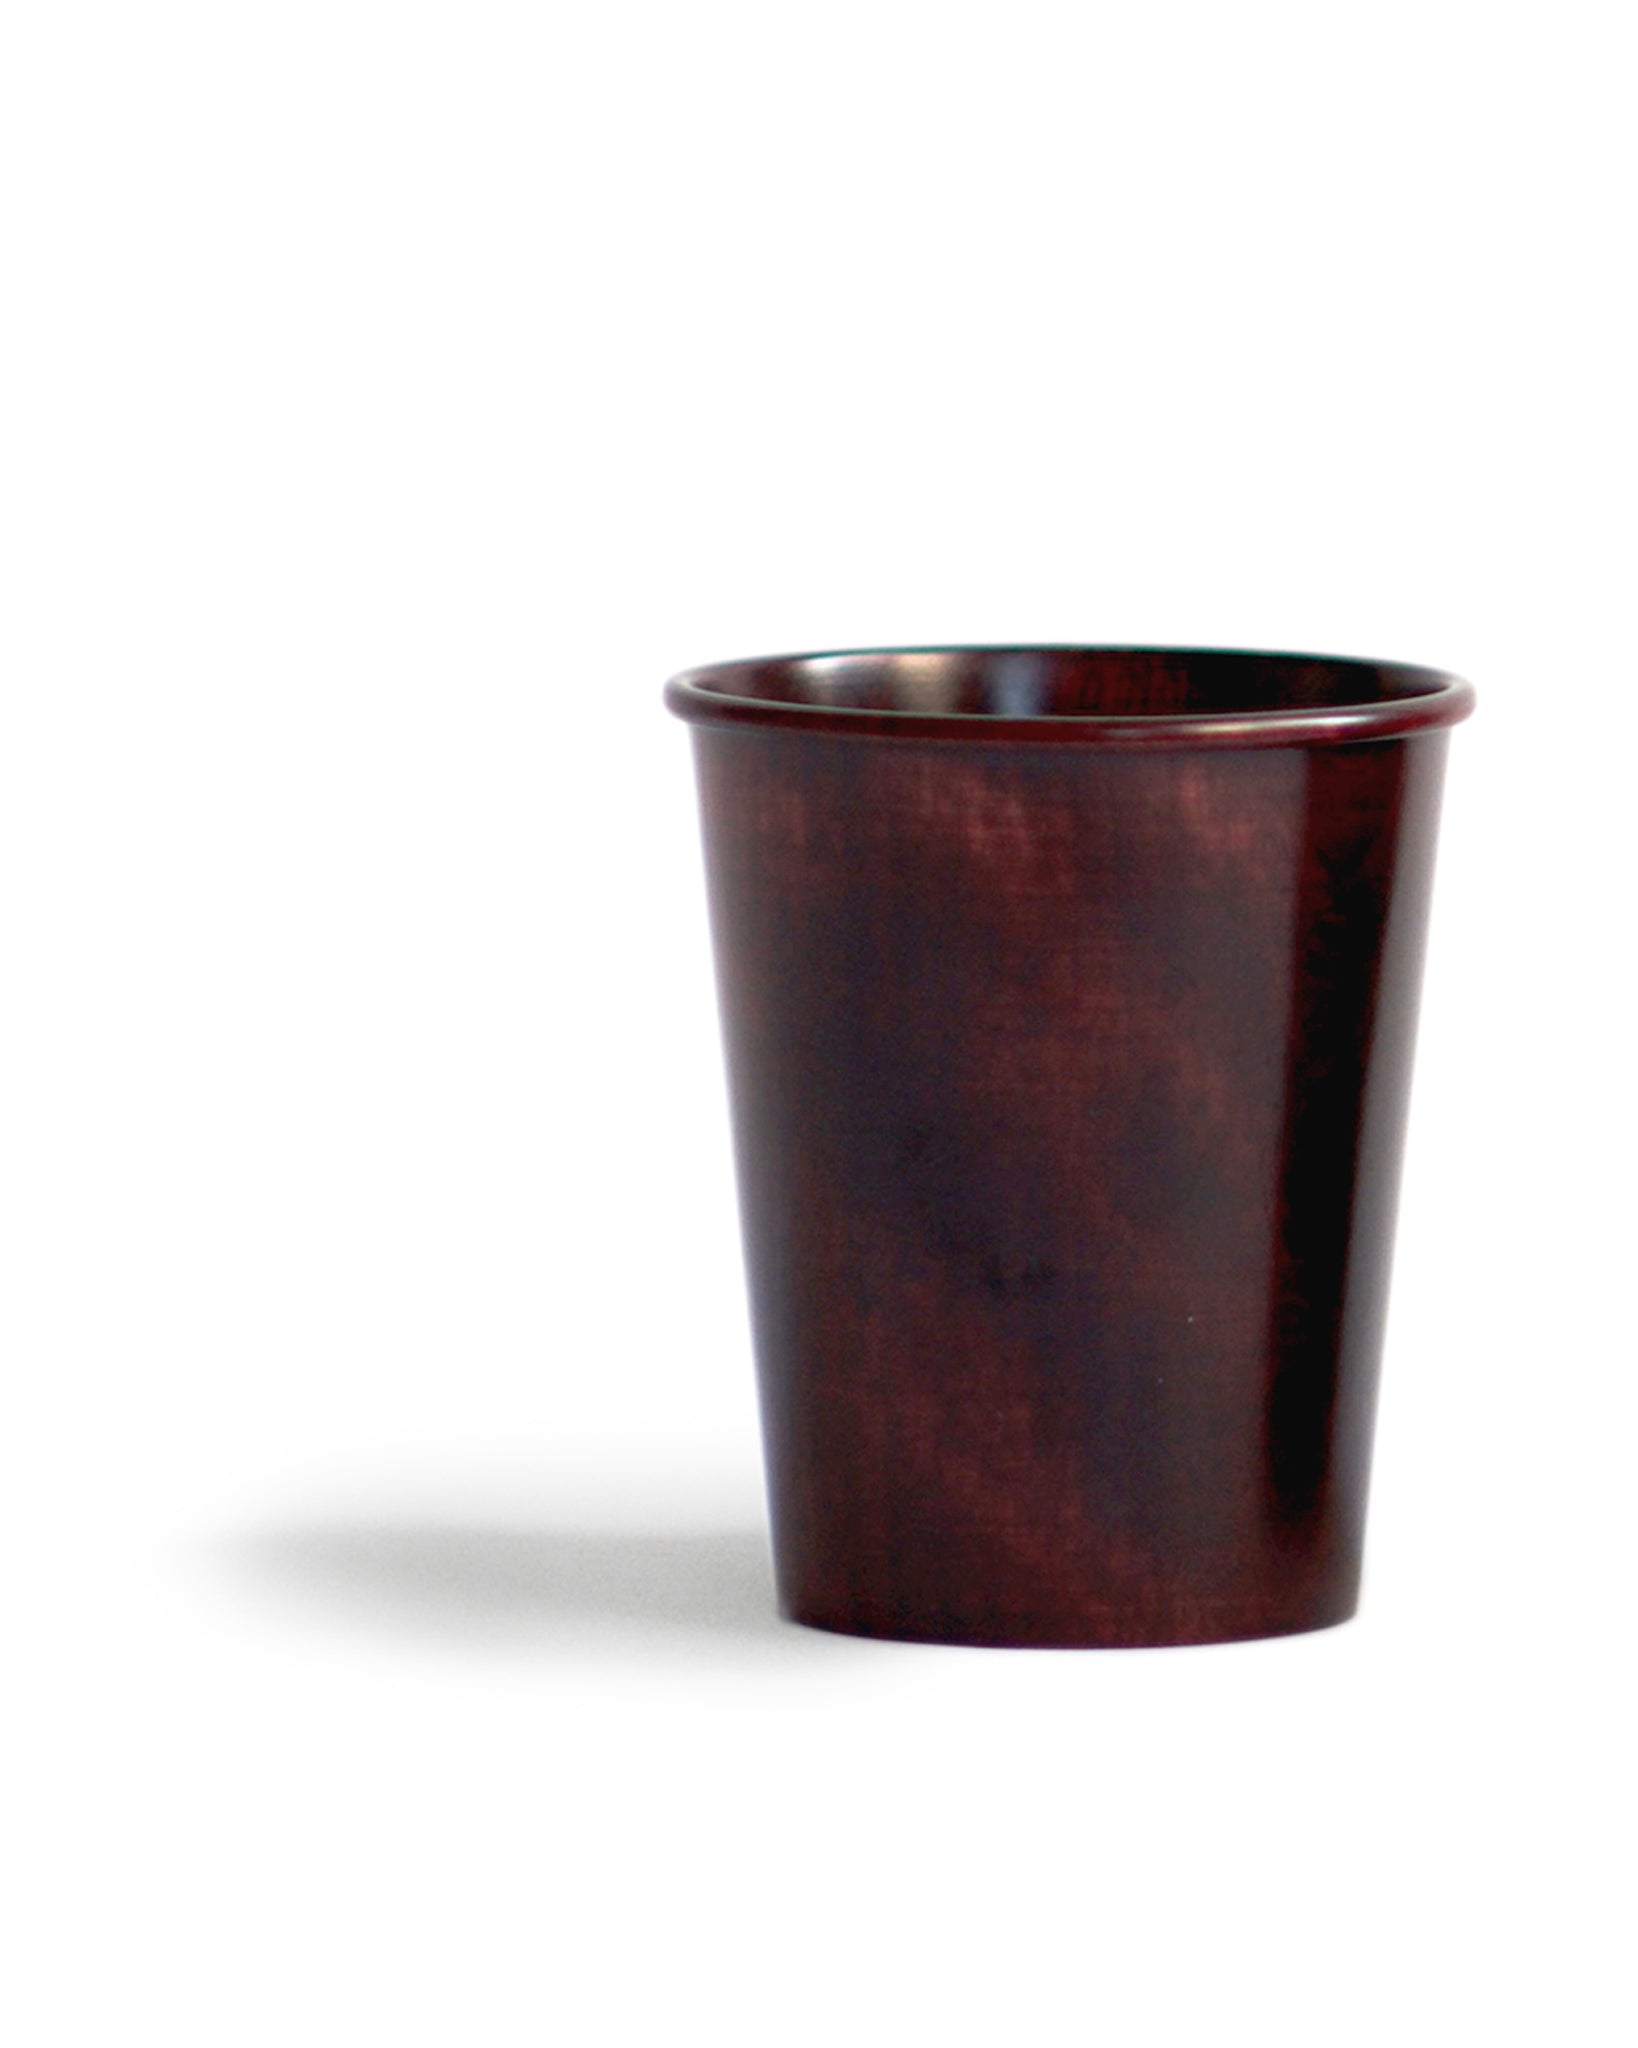 Red urushi wood cup silhouetted against white background.